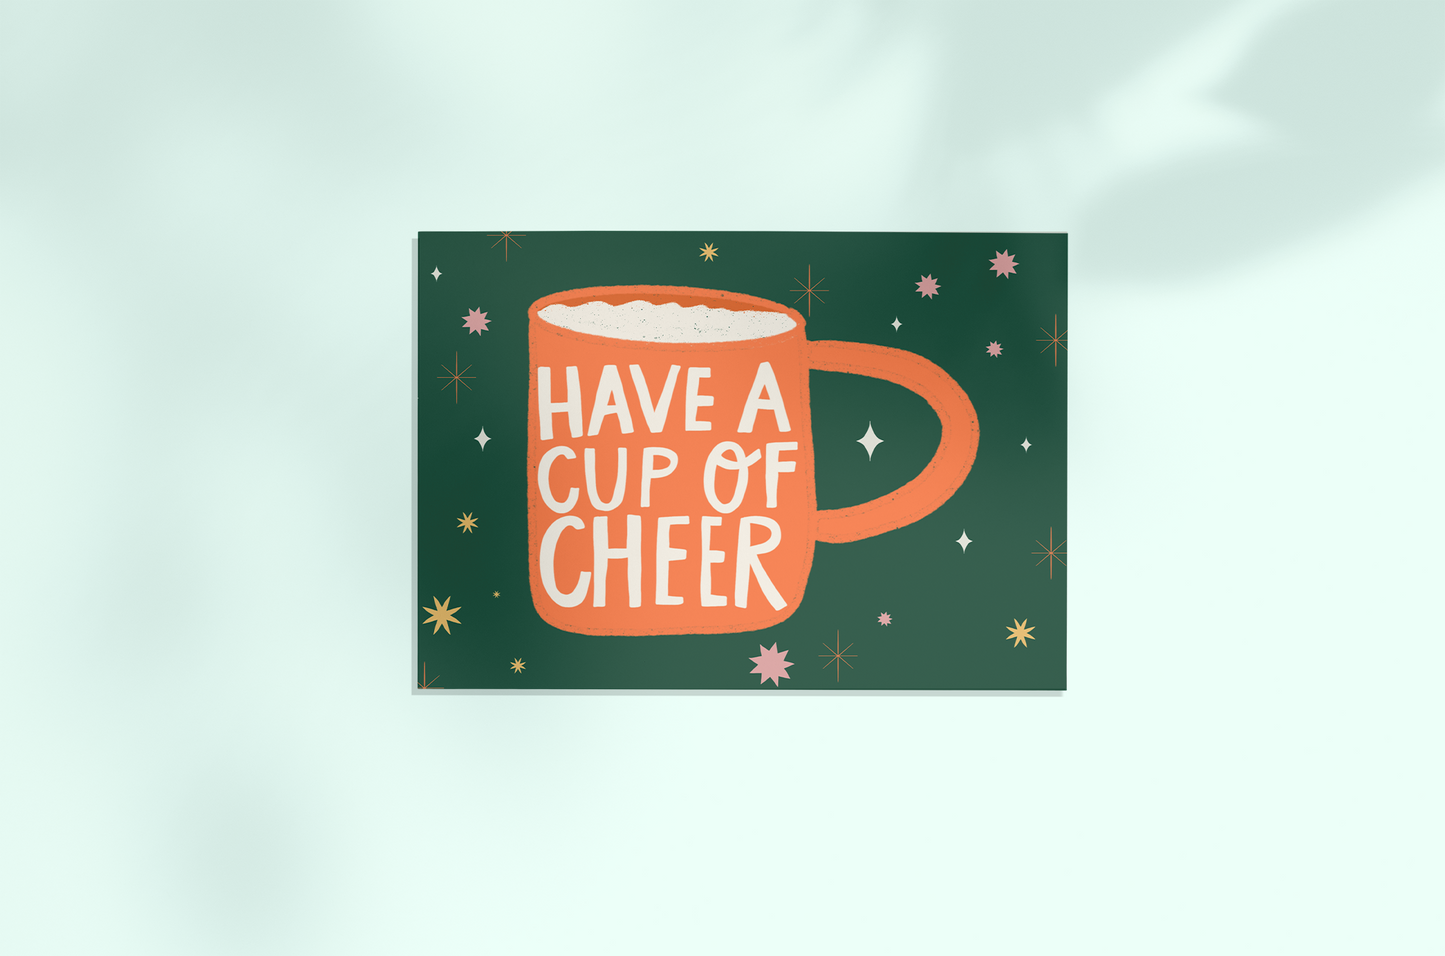 Have a cup of cheer (green)